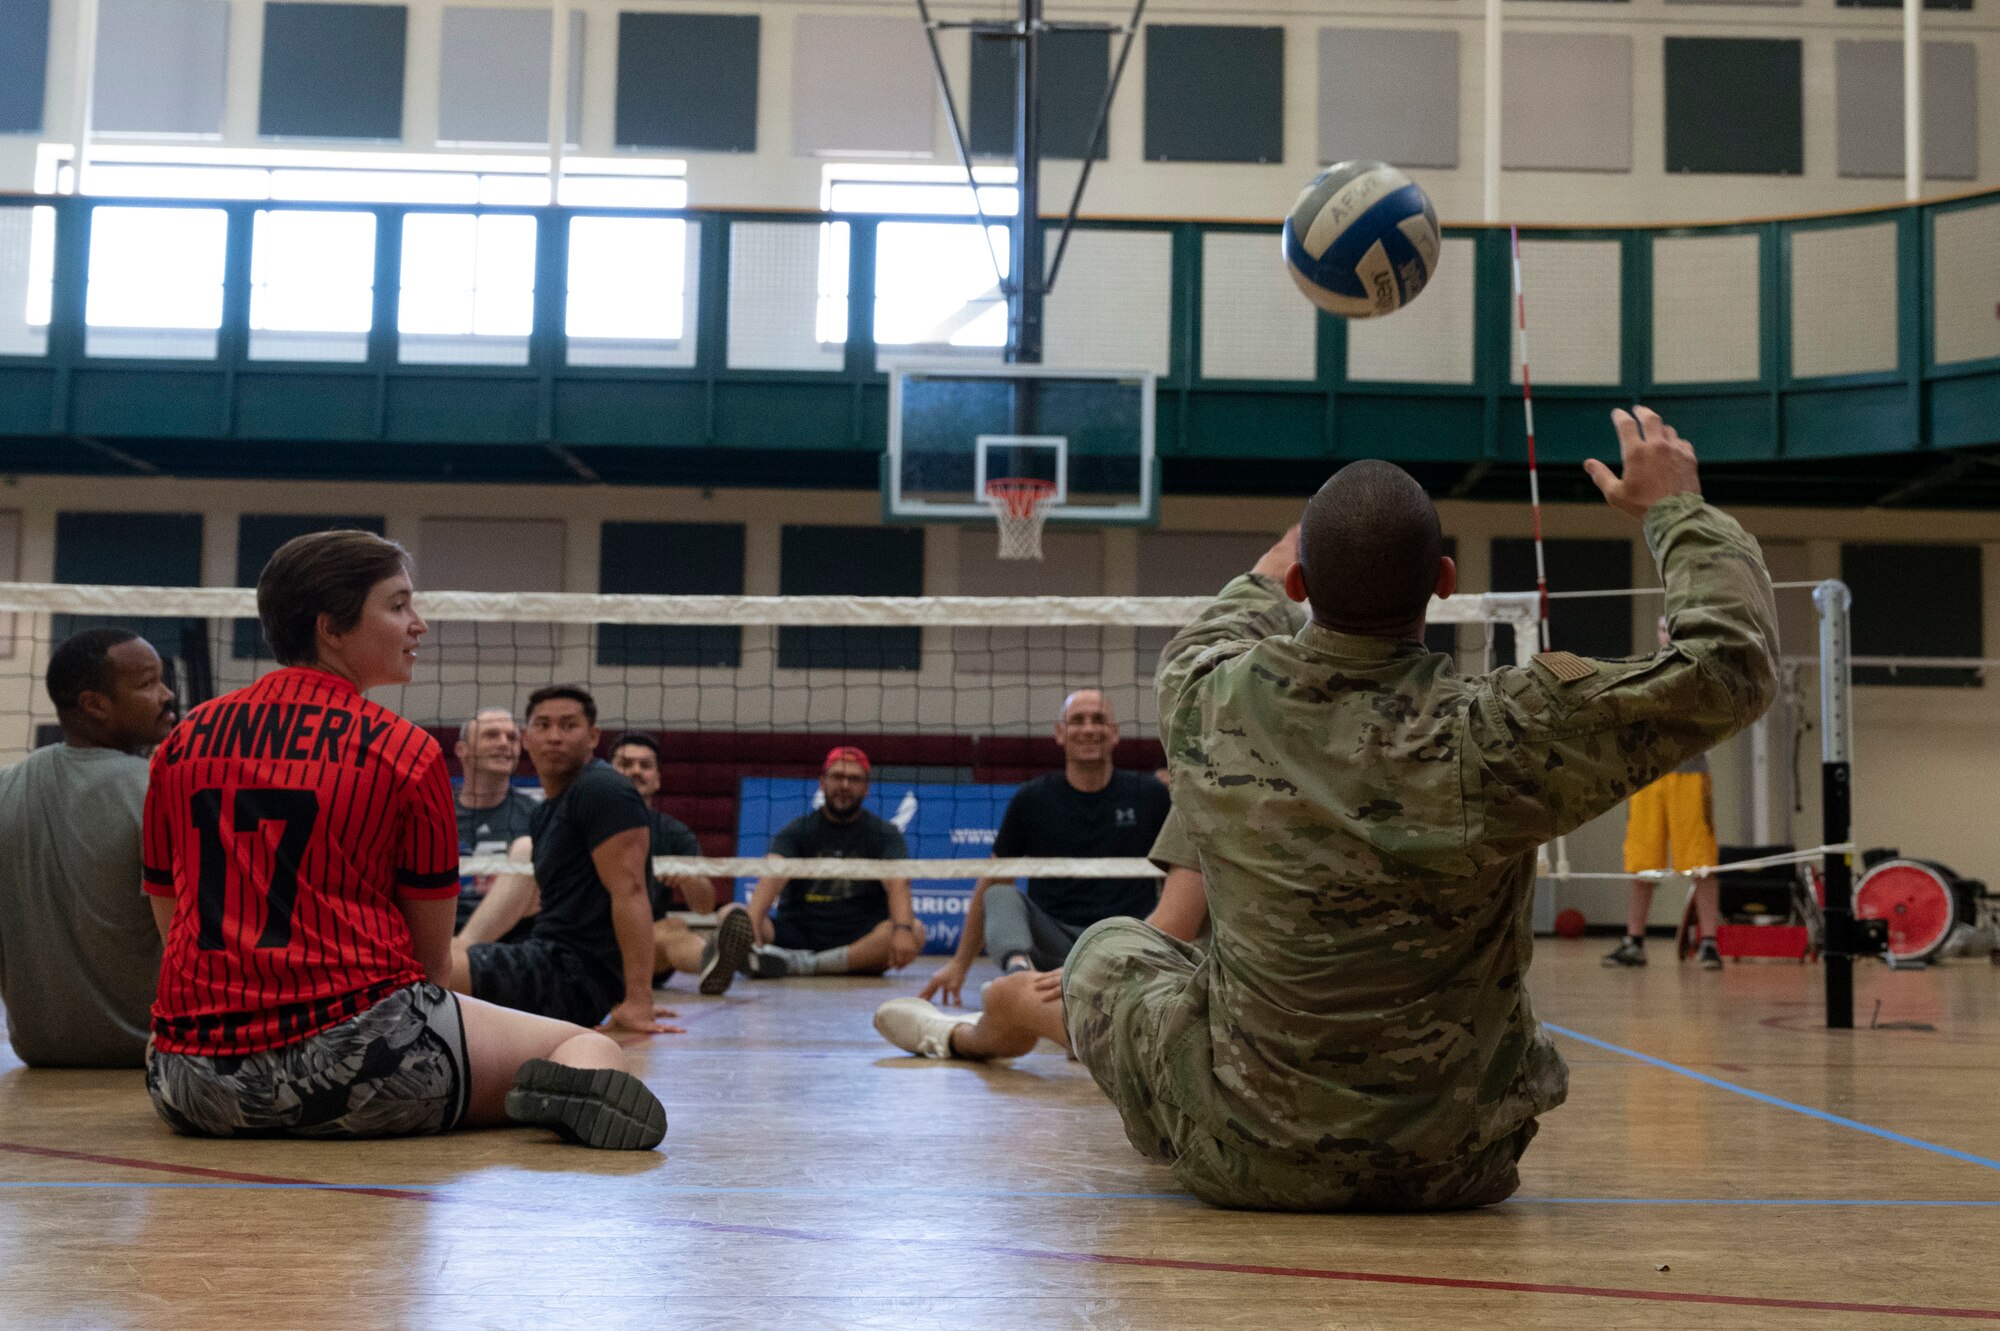 Several U.S. Airmen attempt sitting volleyball during an Air Force Wounded Warrior Program
(AFW2) immersion event at Laughlin Air Force Base, Texas, June 15, 2022. The AFW2 Program is a
Congressionally-mandated and Federally-funded organization tasked with taking care of U.S. Air Force
wounded, ill, and injured Airmen, Veterans, and their families. (U.S. Air Force photo by Airman 1st Class
Kailee Reynolds)